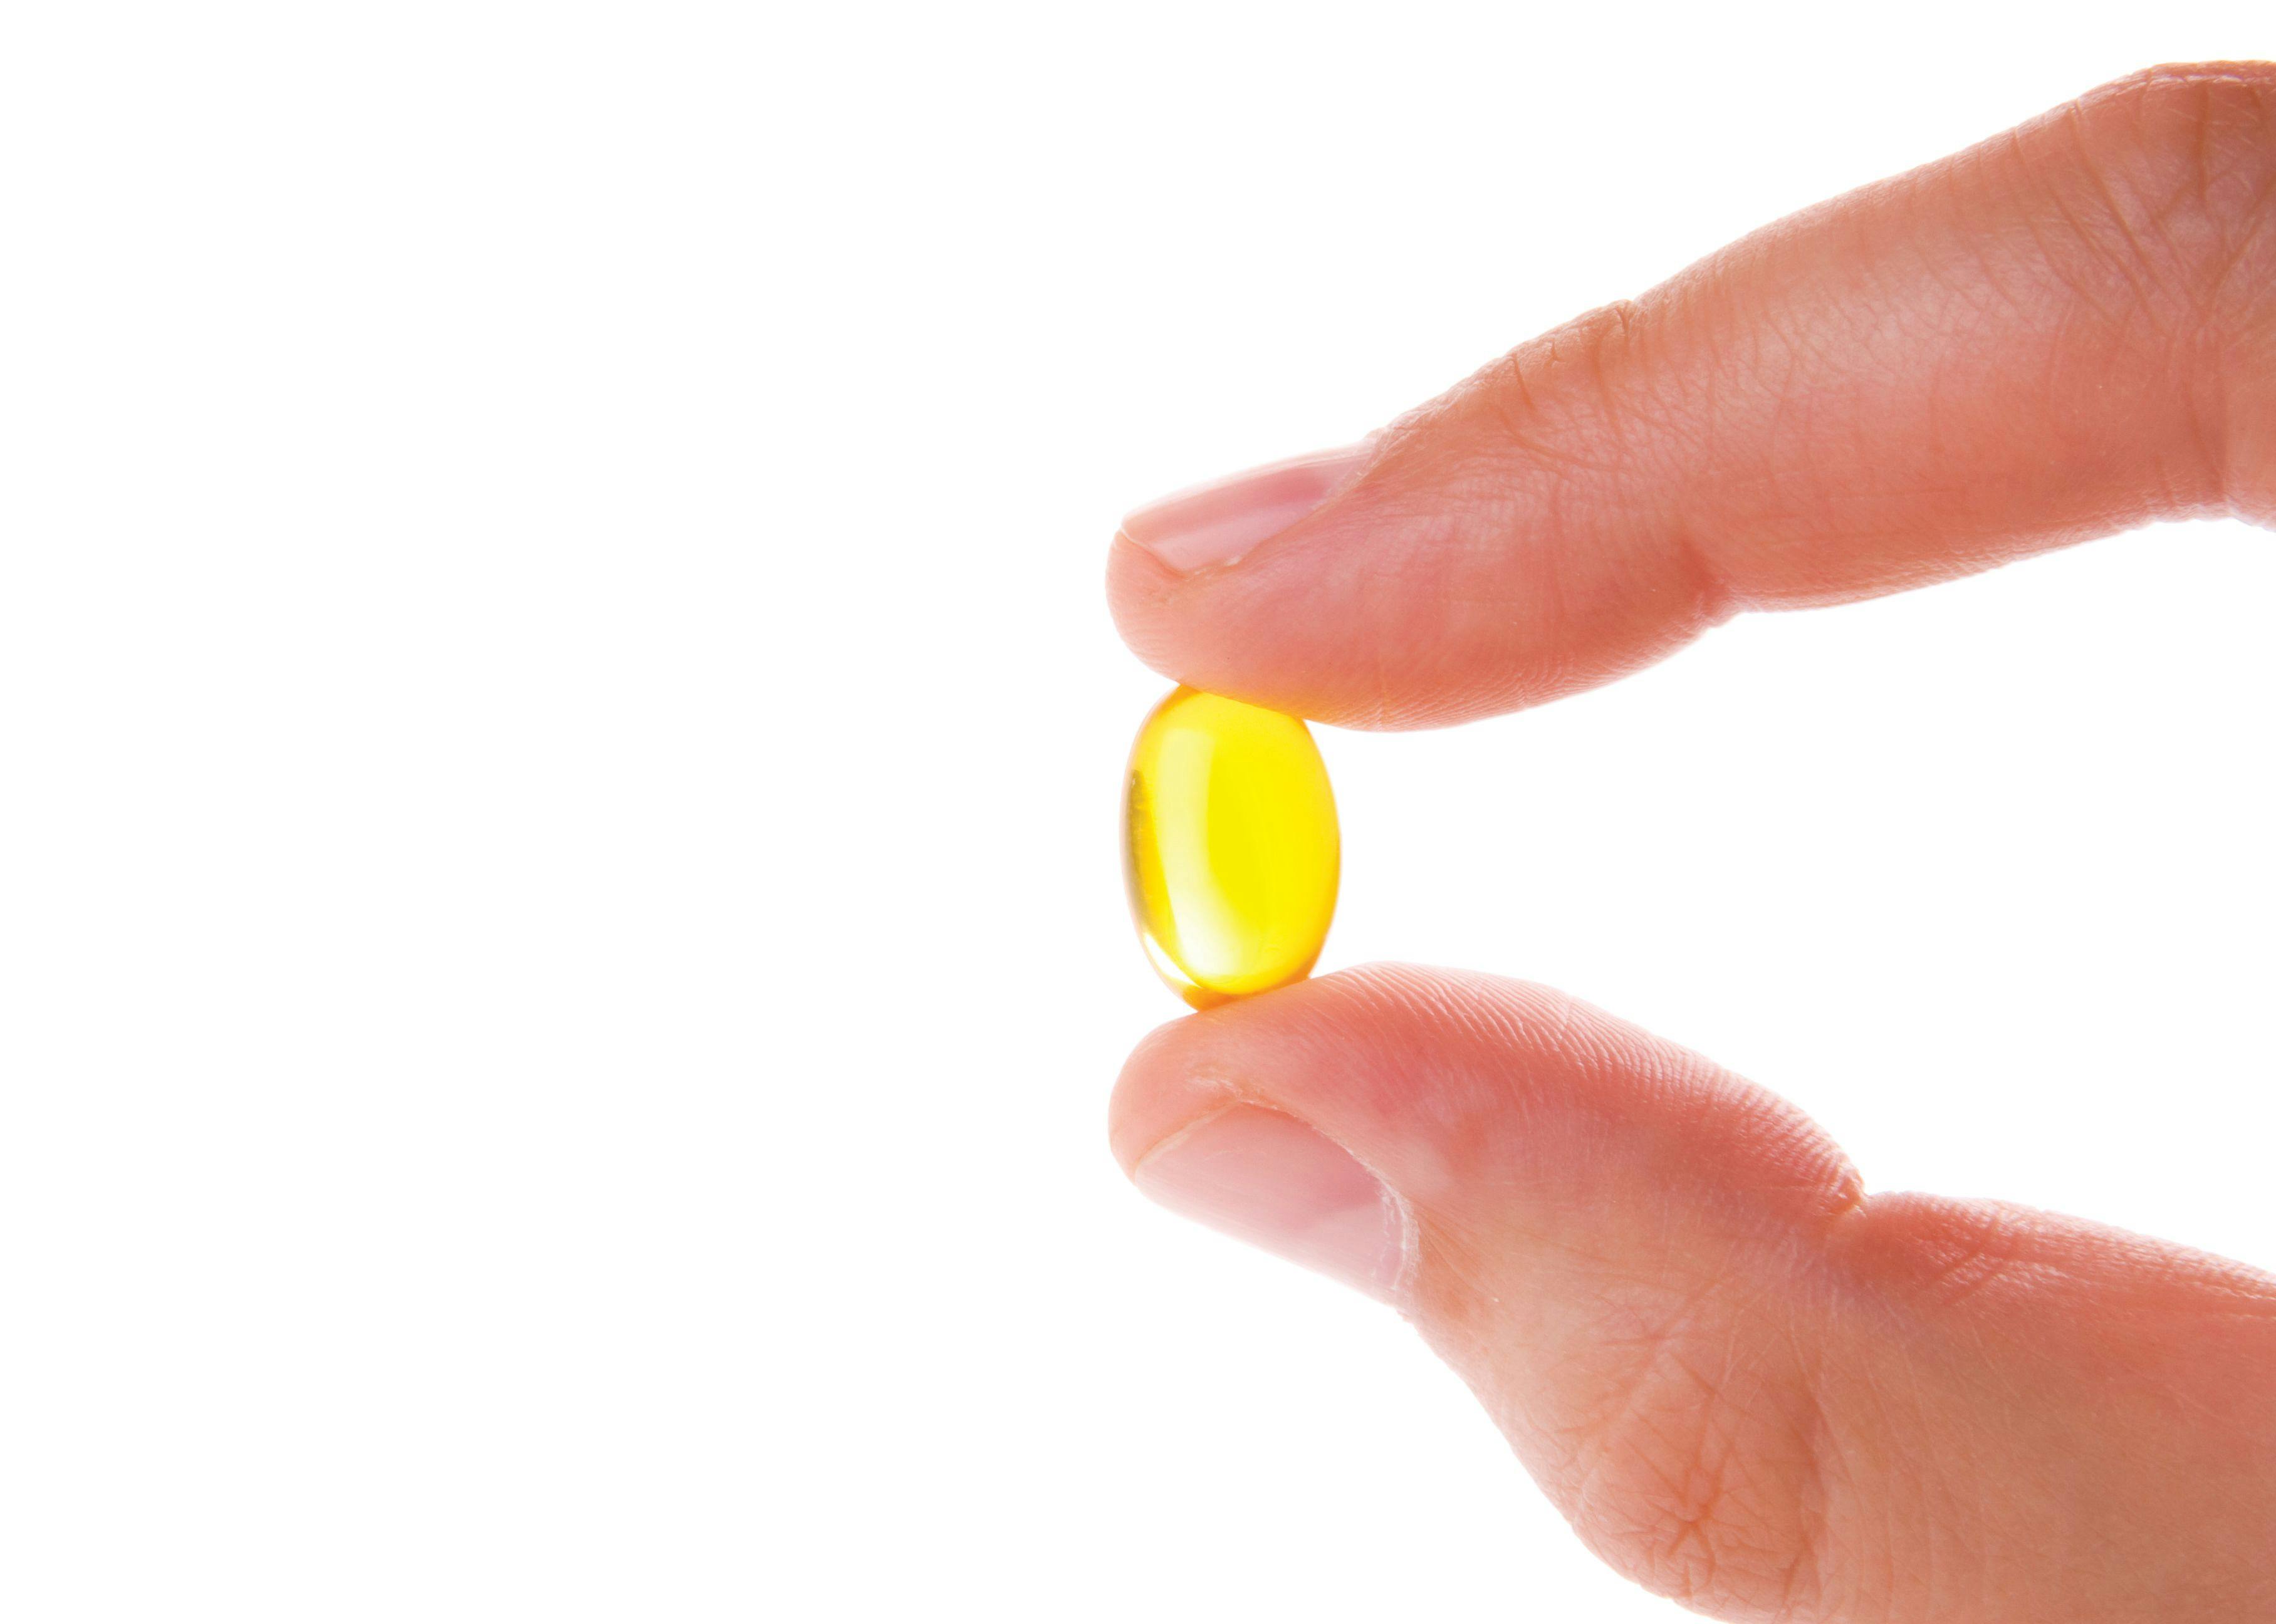 New Breakthroughs in Omega-3 Research